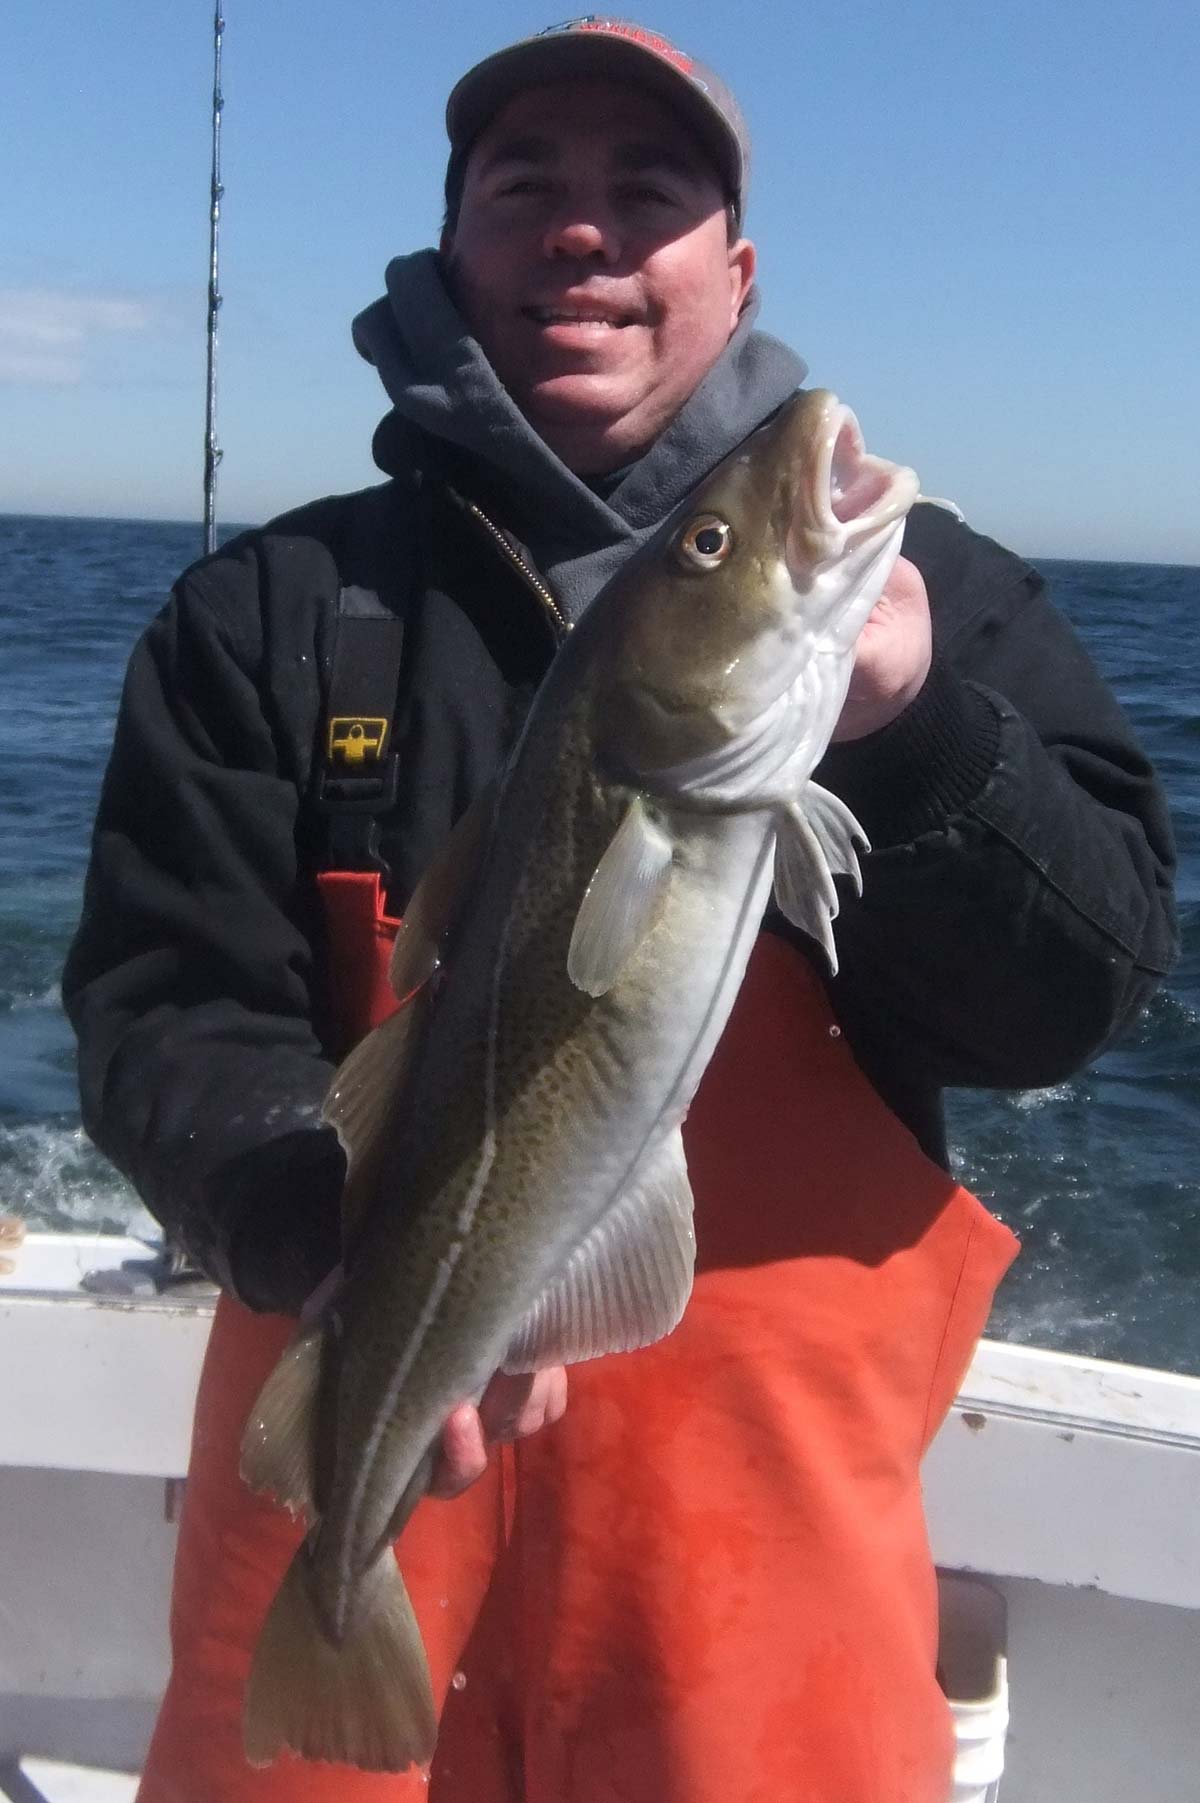 A cold winter day can become rather warm when the cod bite is on.